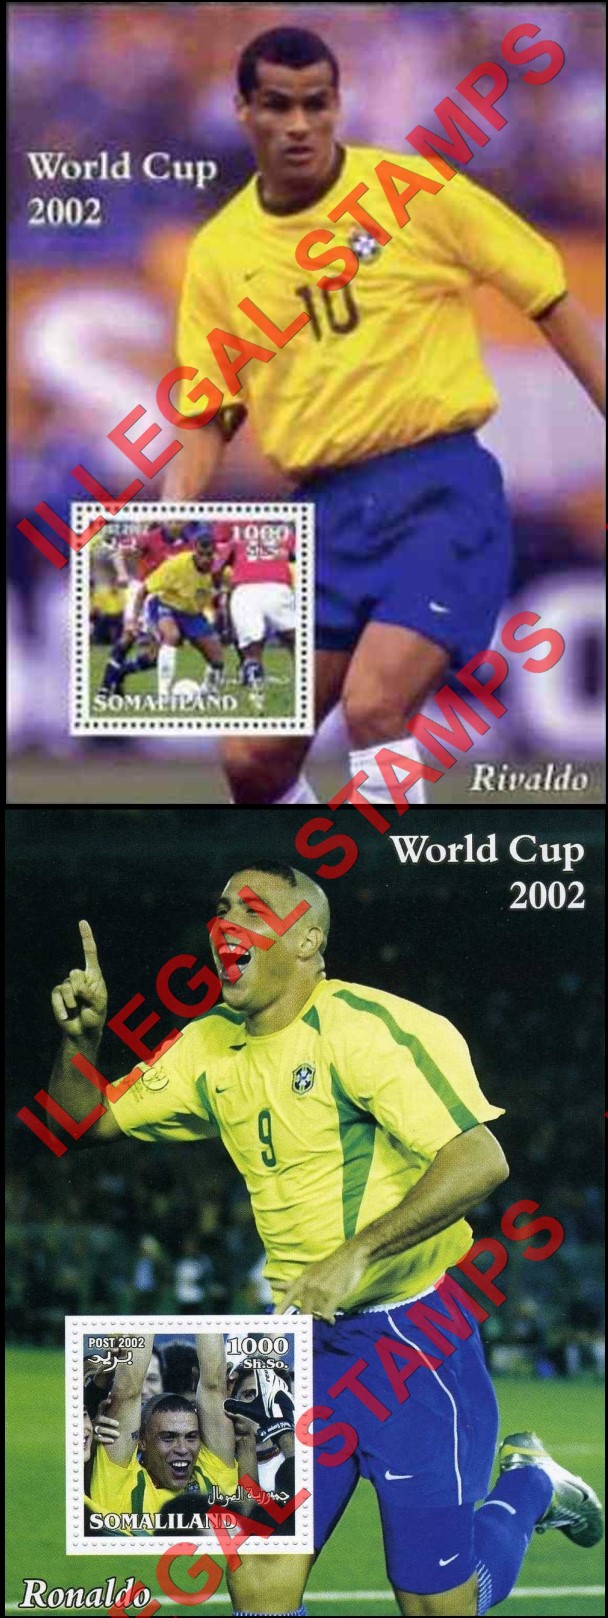 Somaliland 2002 Football World Cup Soccer Players Illegal Stamp Souvenir Sheets of 1